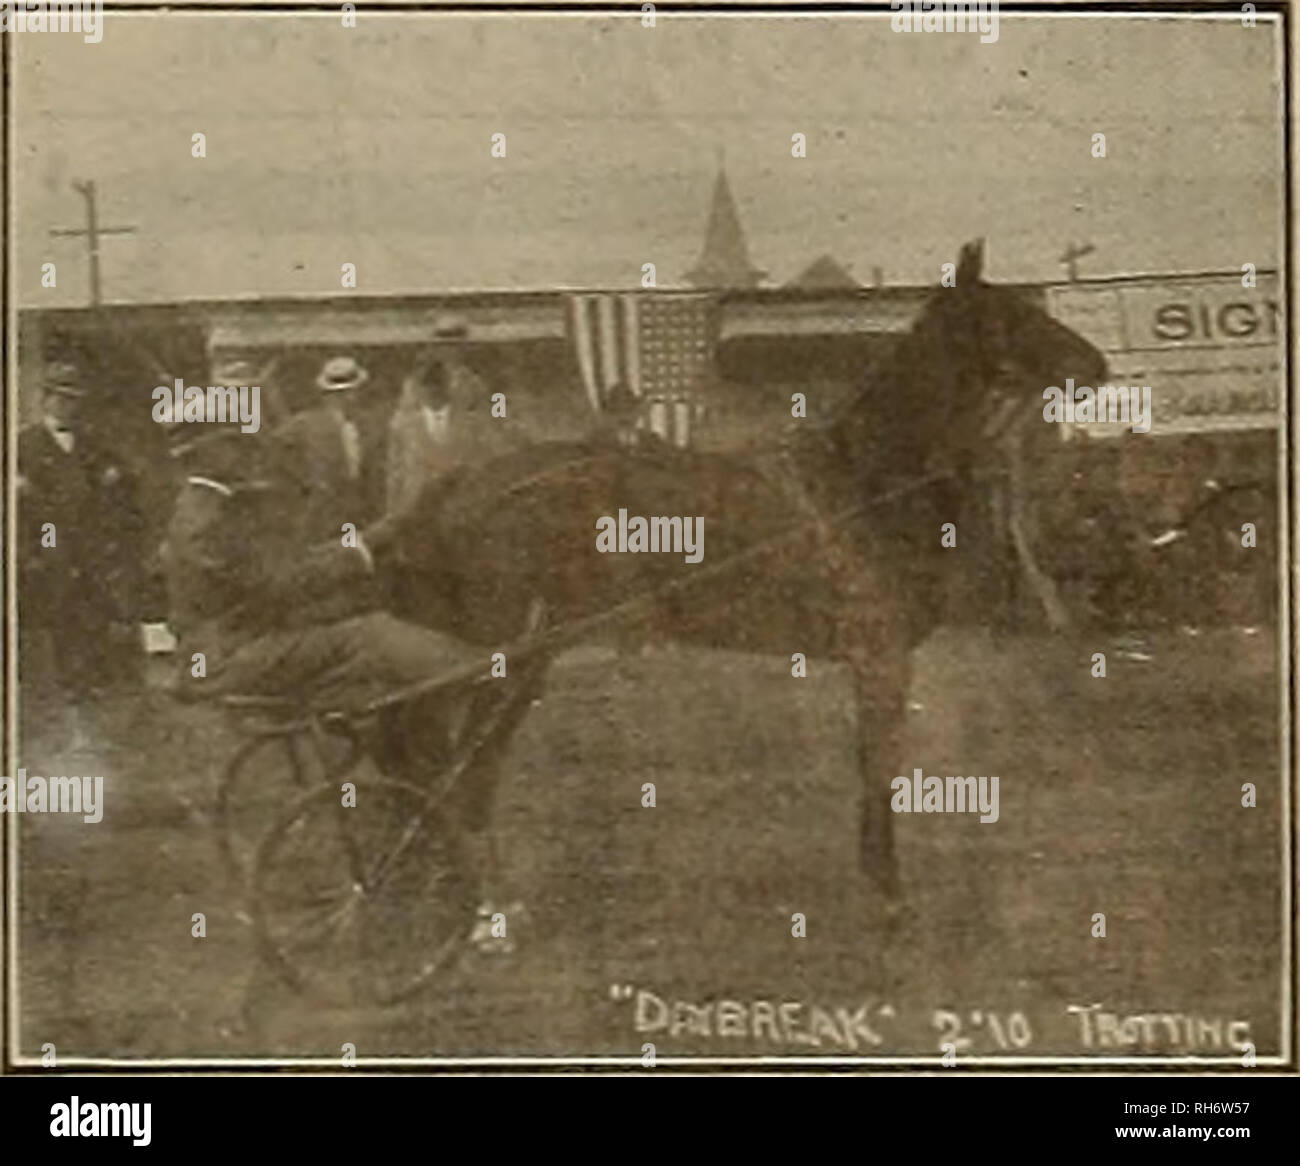 . Breeder and sportsman. Horses. SELBY WINS THE HANDICAP! At Madera, Cal.. May 25-6-7, 1911. This Blue Ribbon event of the Pacific Coast was won by Mr. Ed Mitchell of Los Angeles, at the 17 yard mark Mr. J. R. Converse of Los Angeles, at the 19 yard mark Mr. Dave Ruhstaller of Sacramento, at the 18 yard mark Mr. F. M. Newbert of Sacramento, at the 20 yard mark 93 x 100 92  100 92 x 100 91 x 100 Tied for third place, 91 x 100. HIGH ON ALL 16 YARD TARGETS is the record of Jlr. Xewbert, an amateur. He broke 365 x 400. Mr. Newbert was also HIGH ON ALL BIRDS, including 50 pairs of Doubles and the  Stock Photo